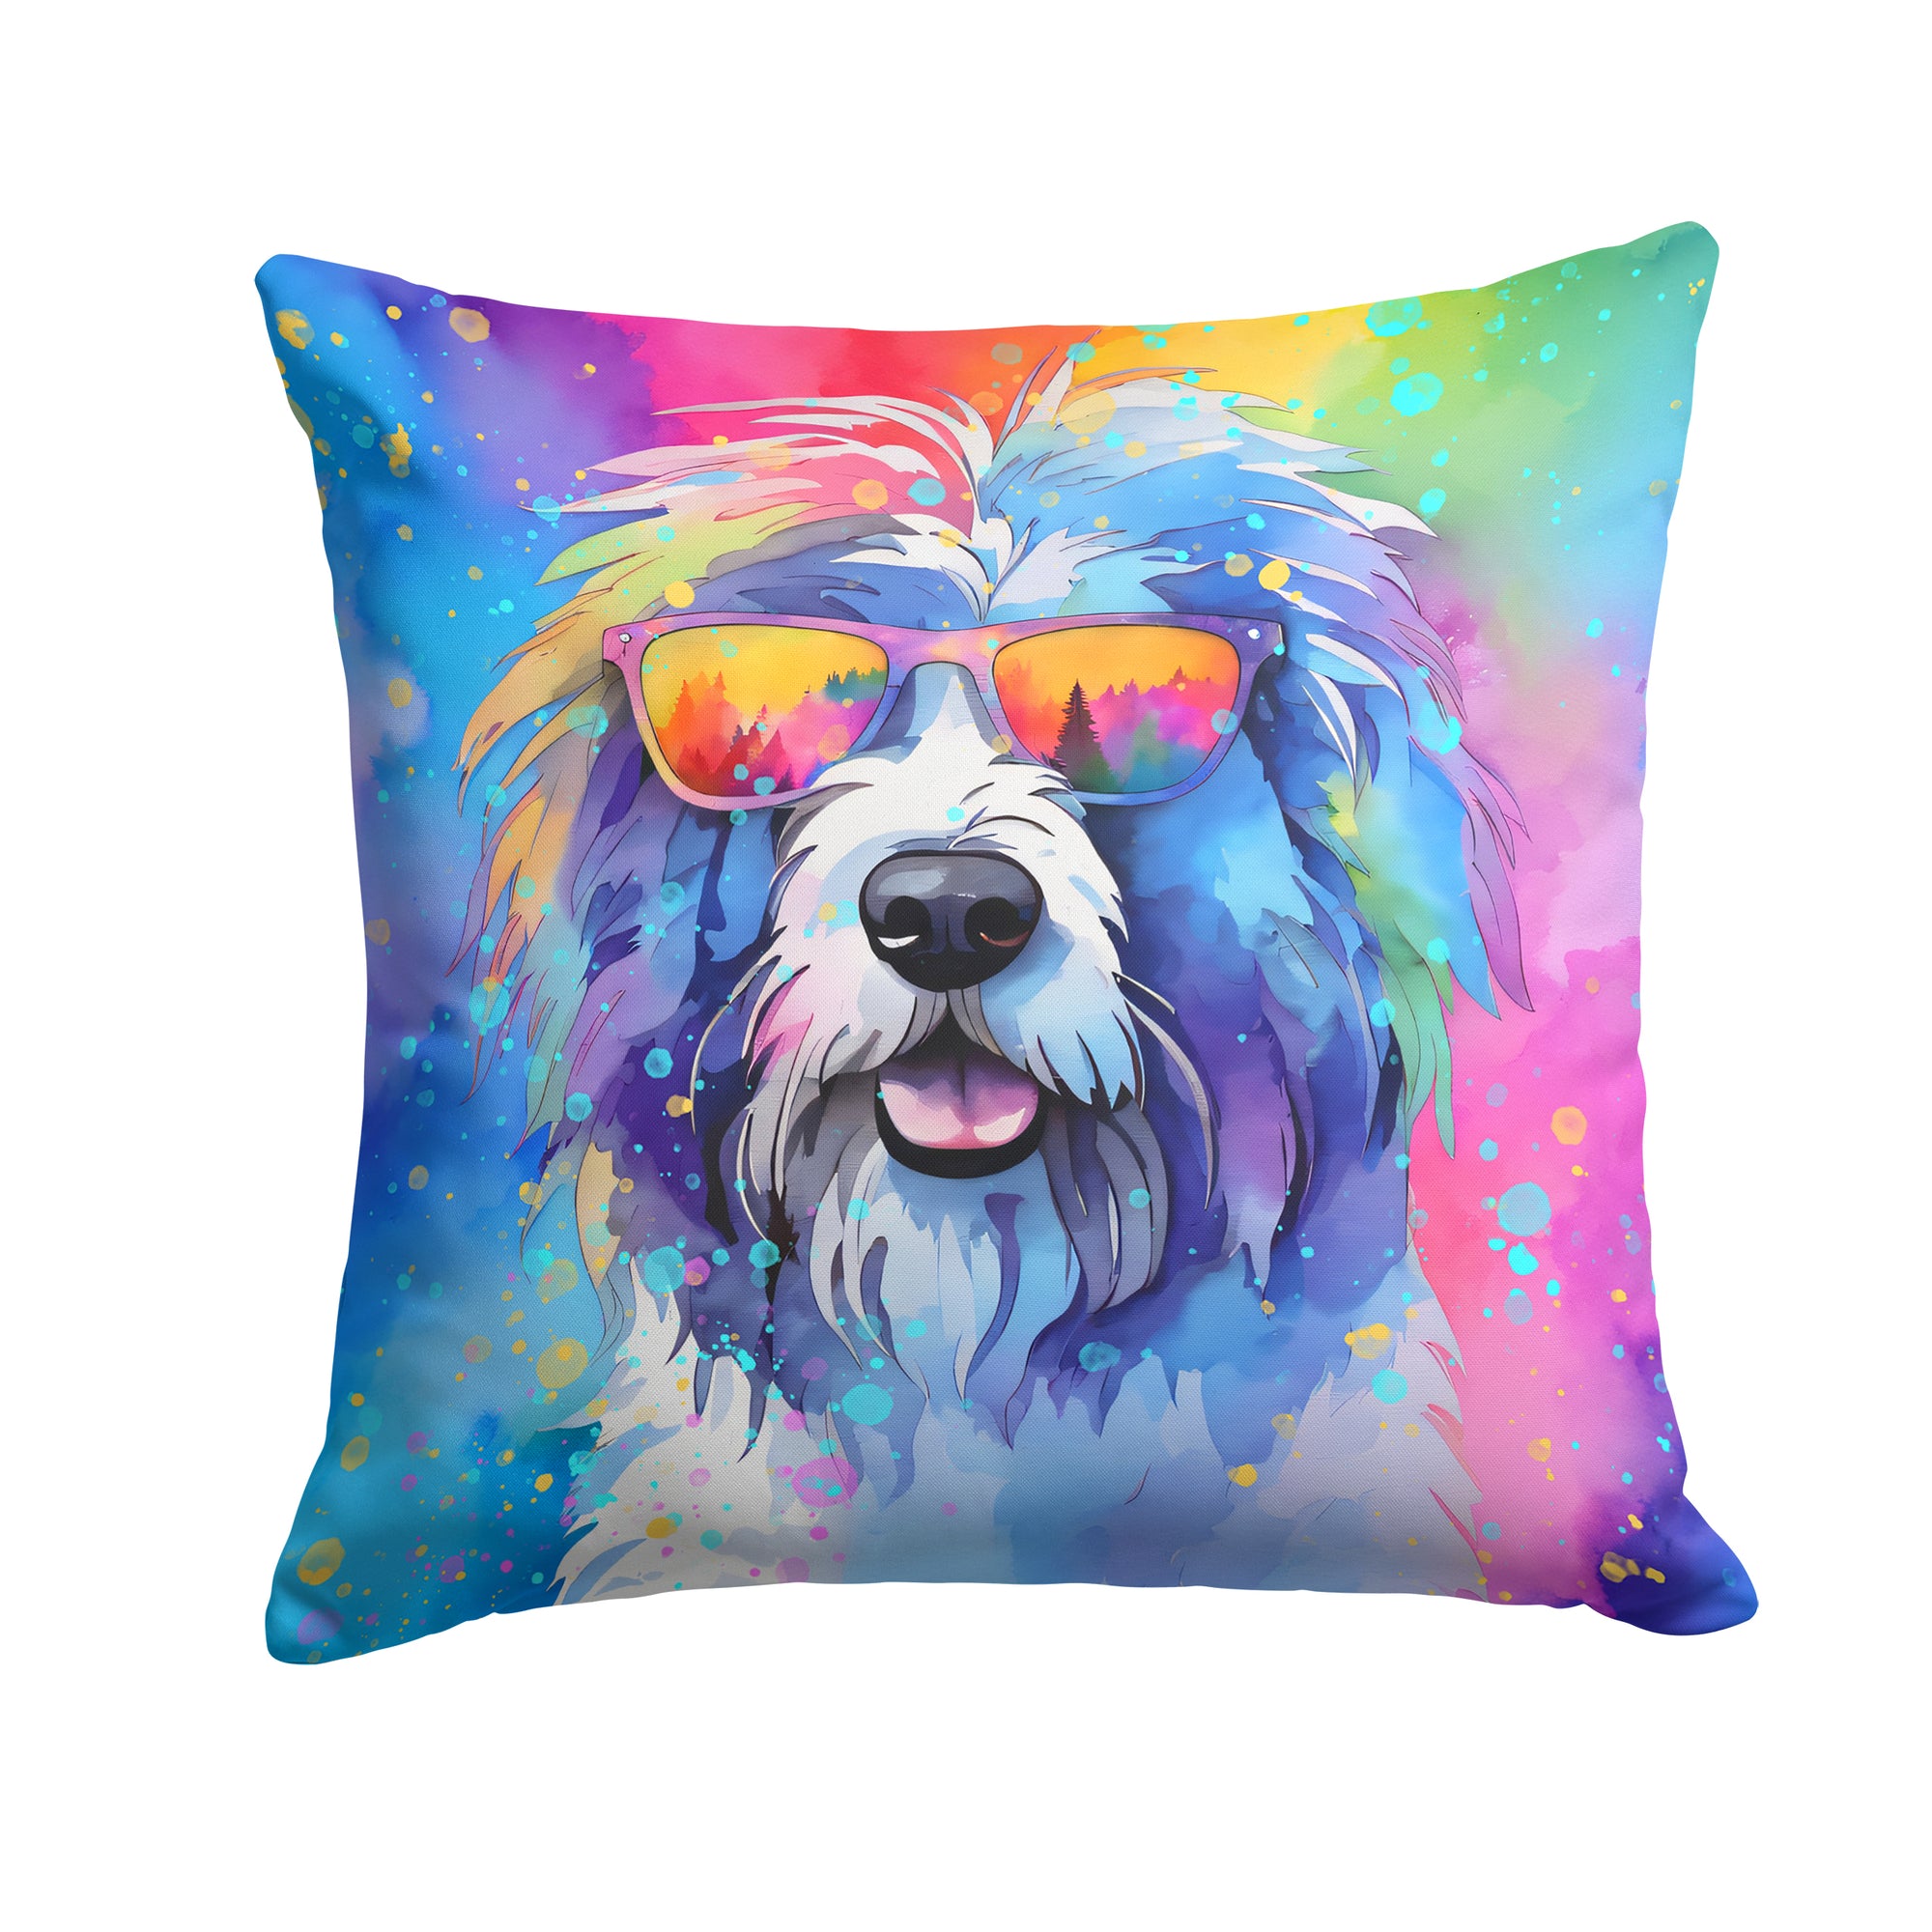 Buy this Old English Sheepdog Hippie Dawg Fabric Decorative Pillow